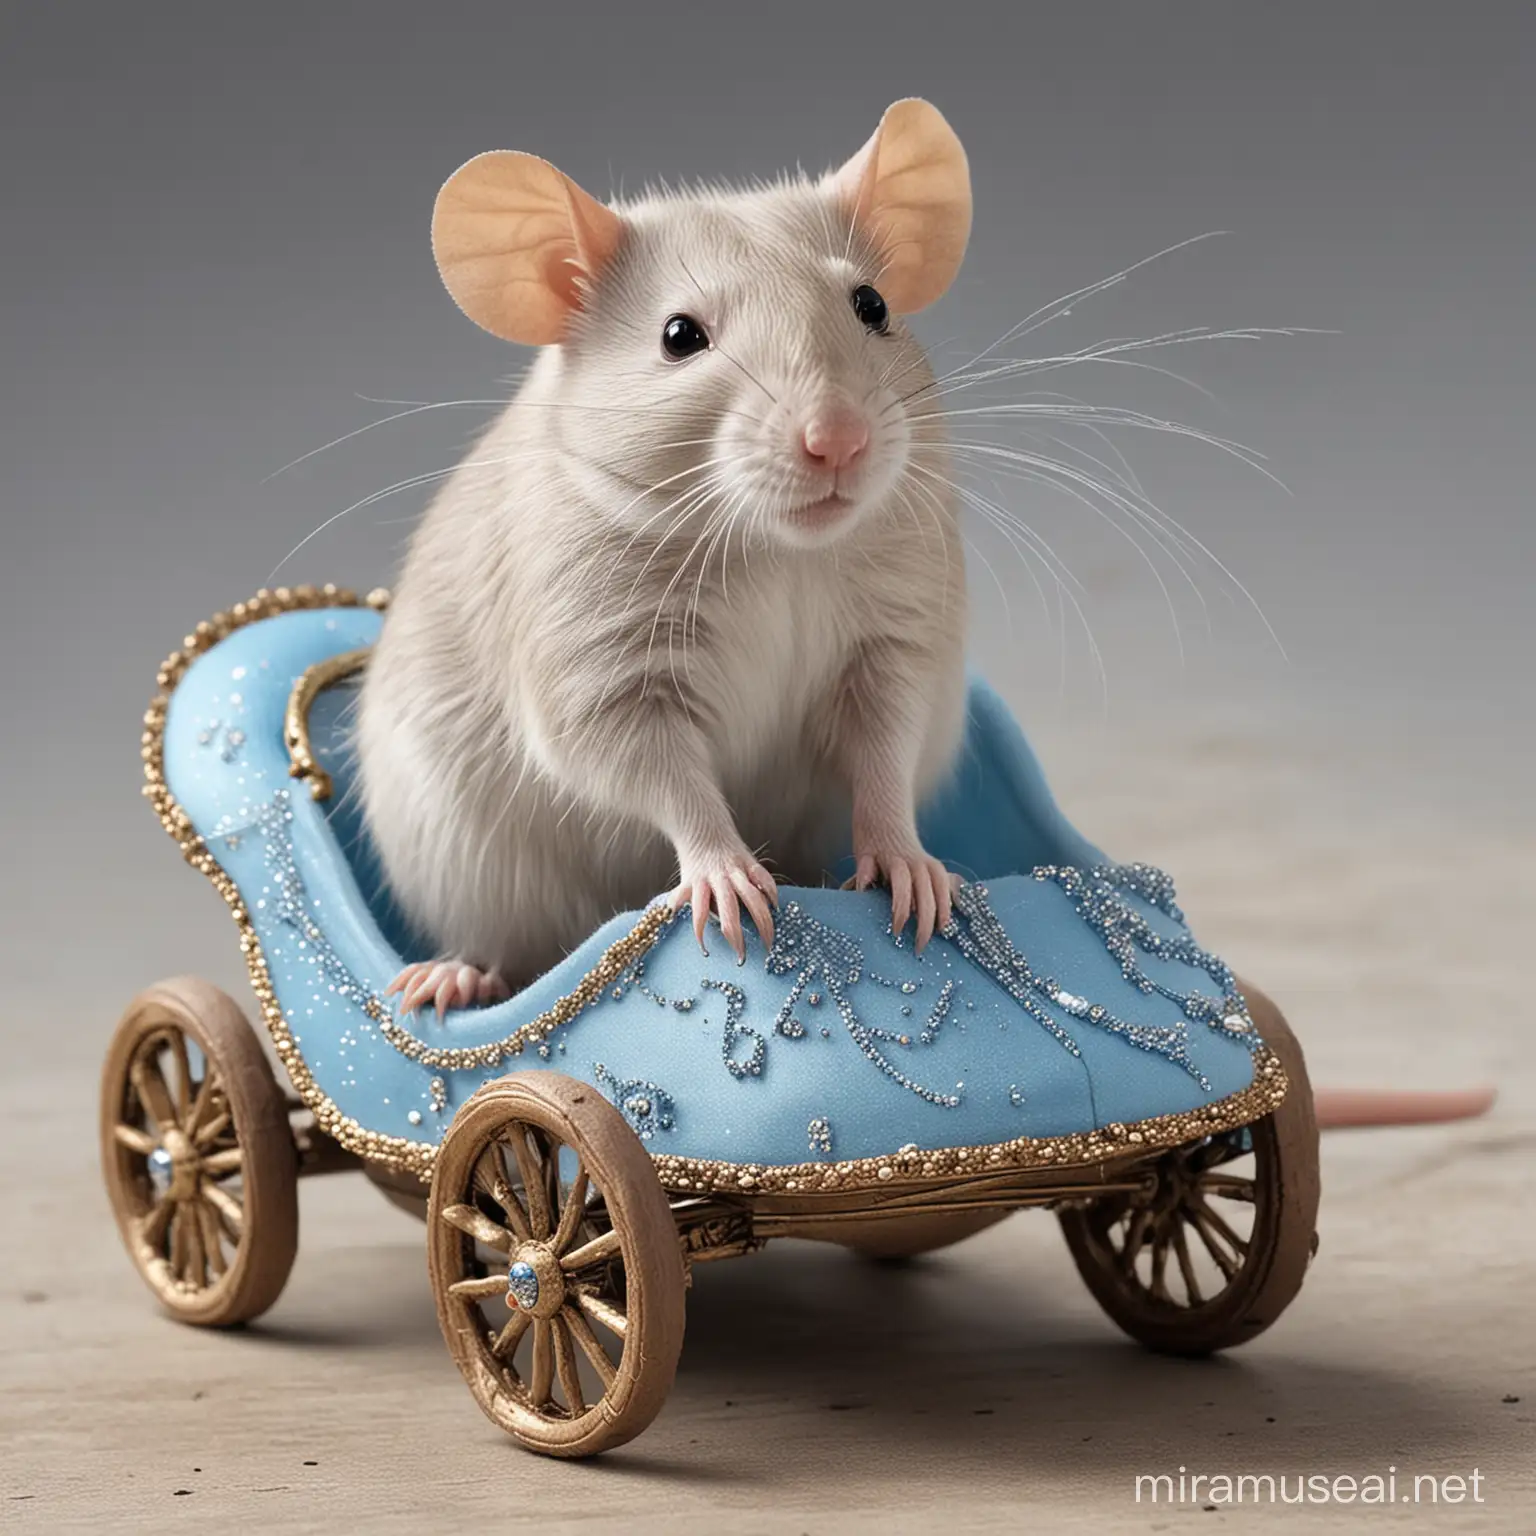 Enchanted Cinderella Rat in a Whimsical Fairytale Setting